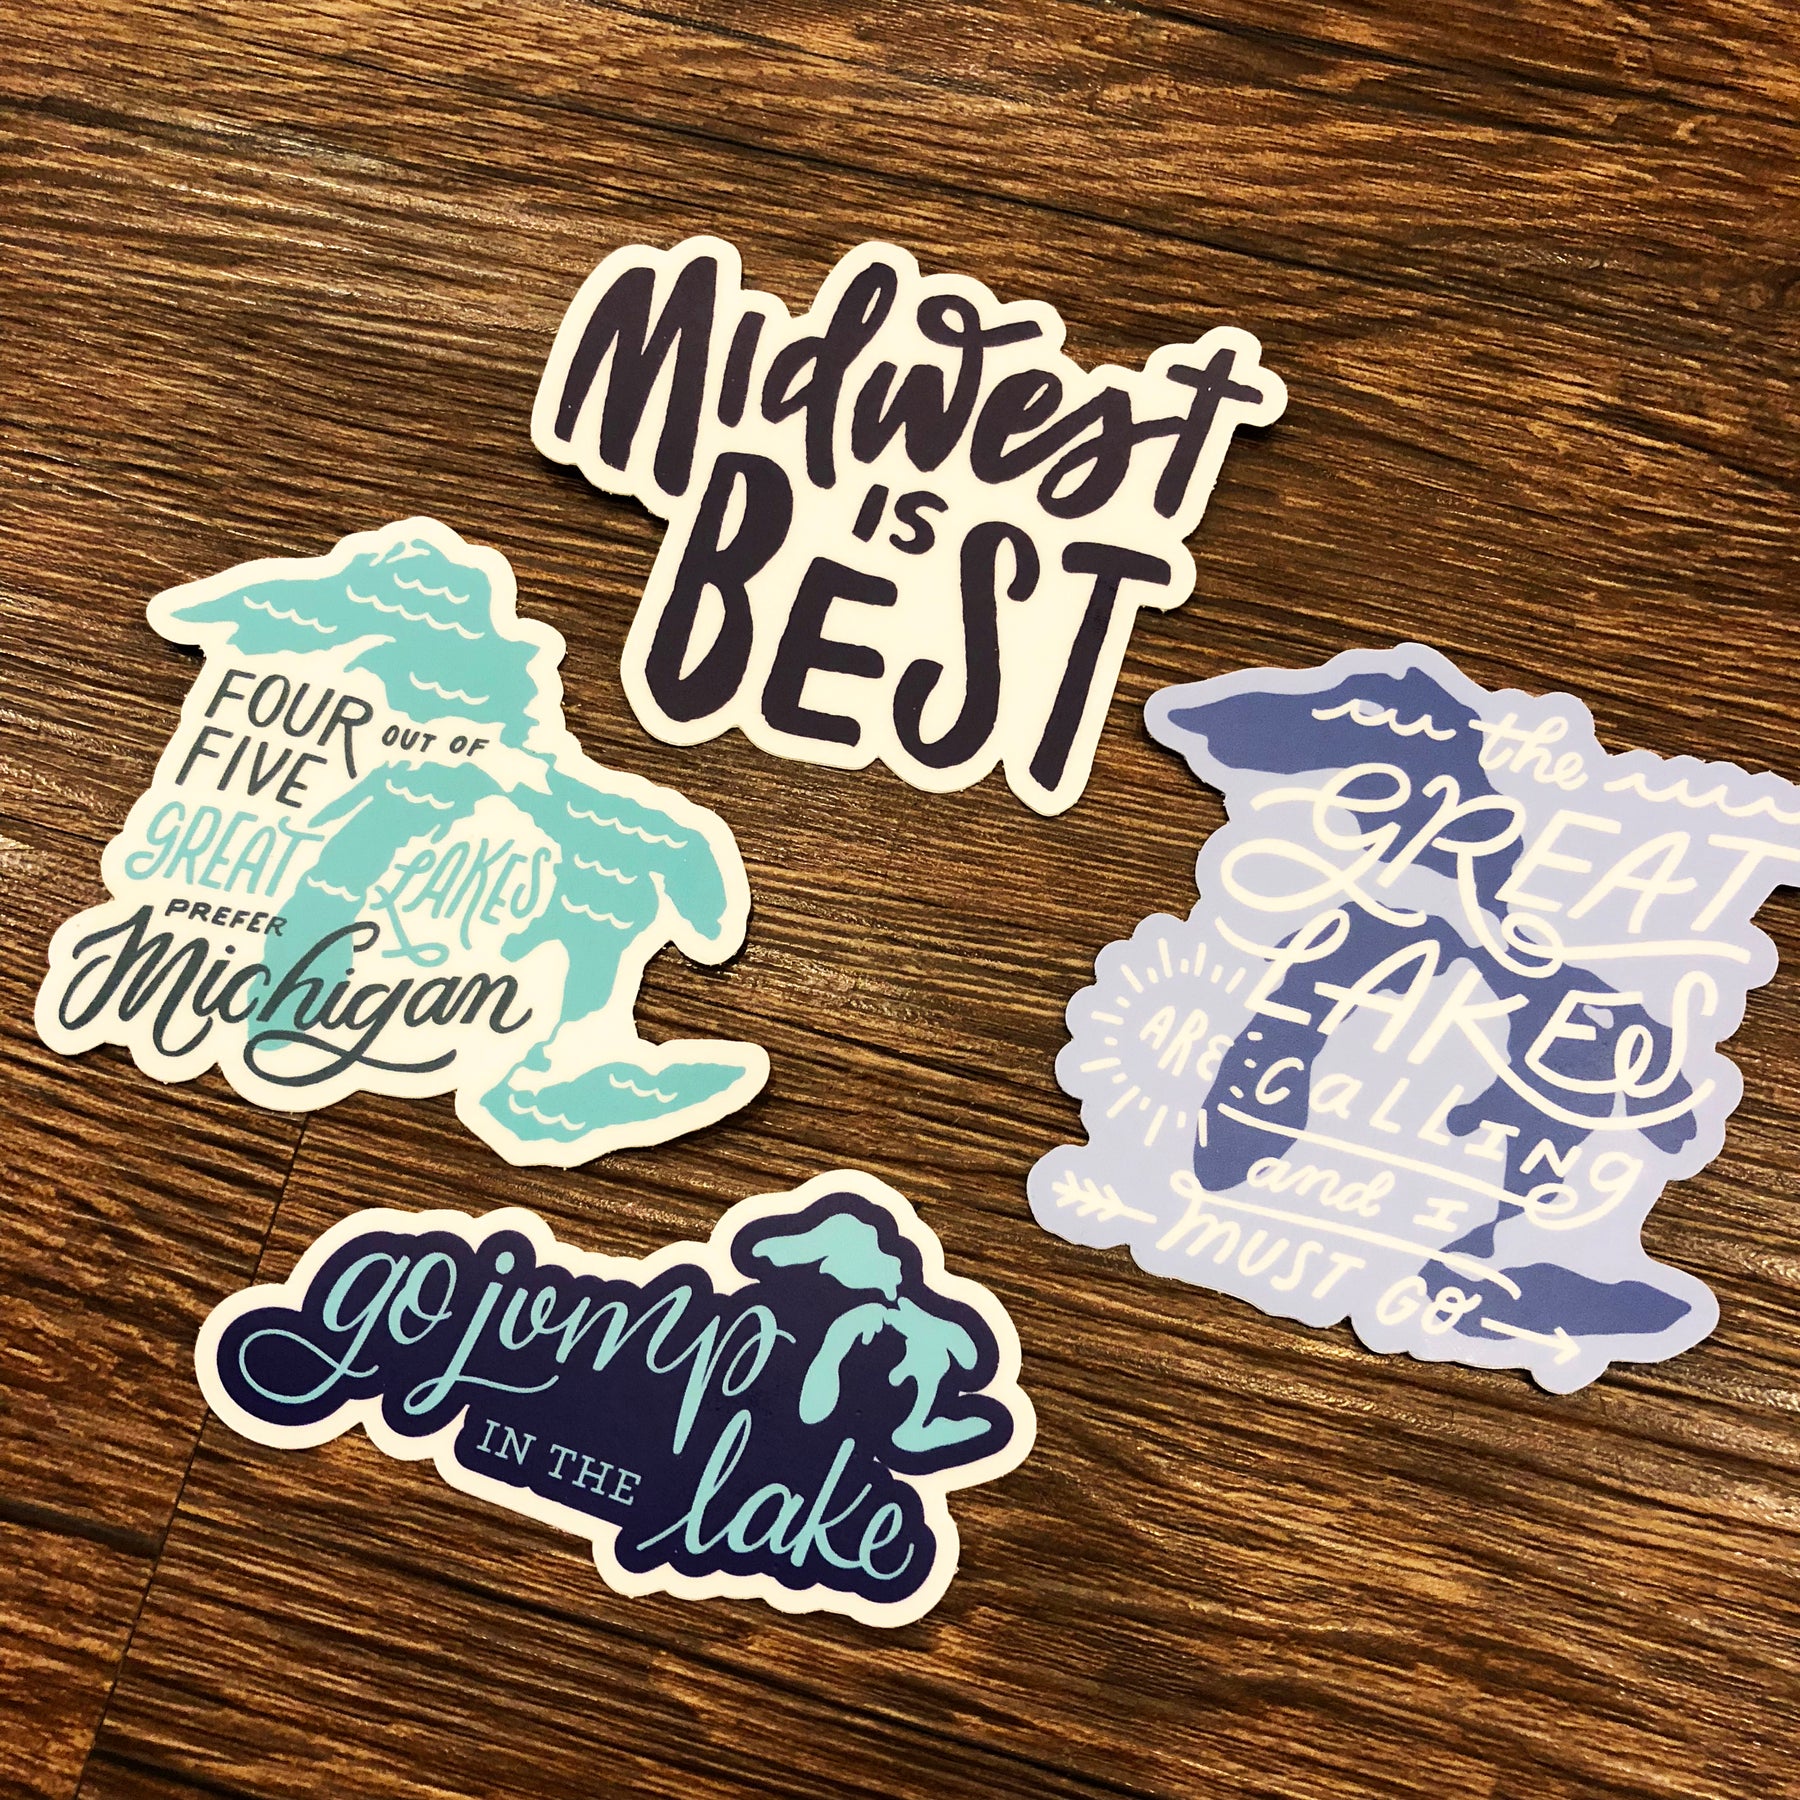 Midwest Supply Co. Just Launched NEW Stickers!